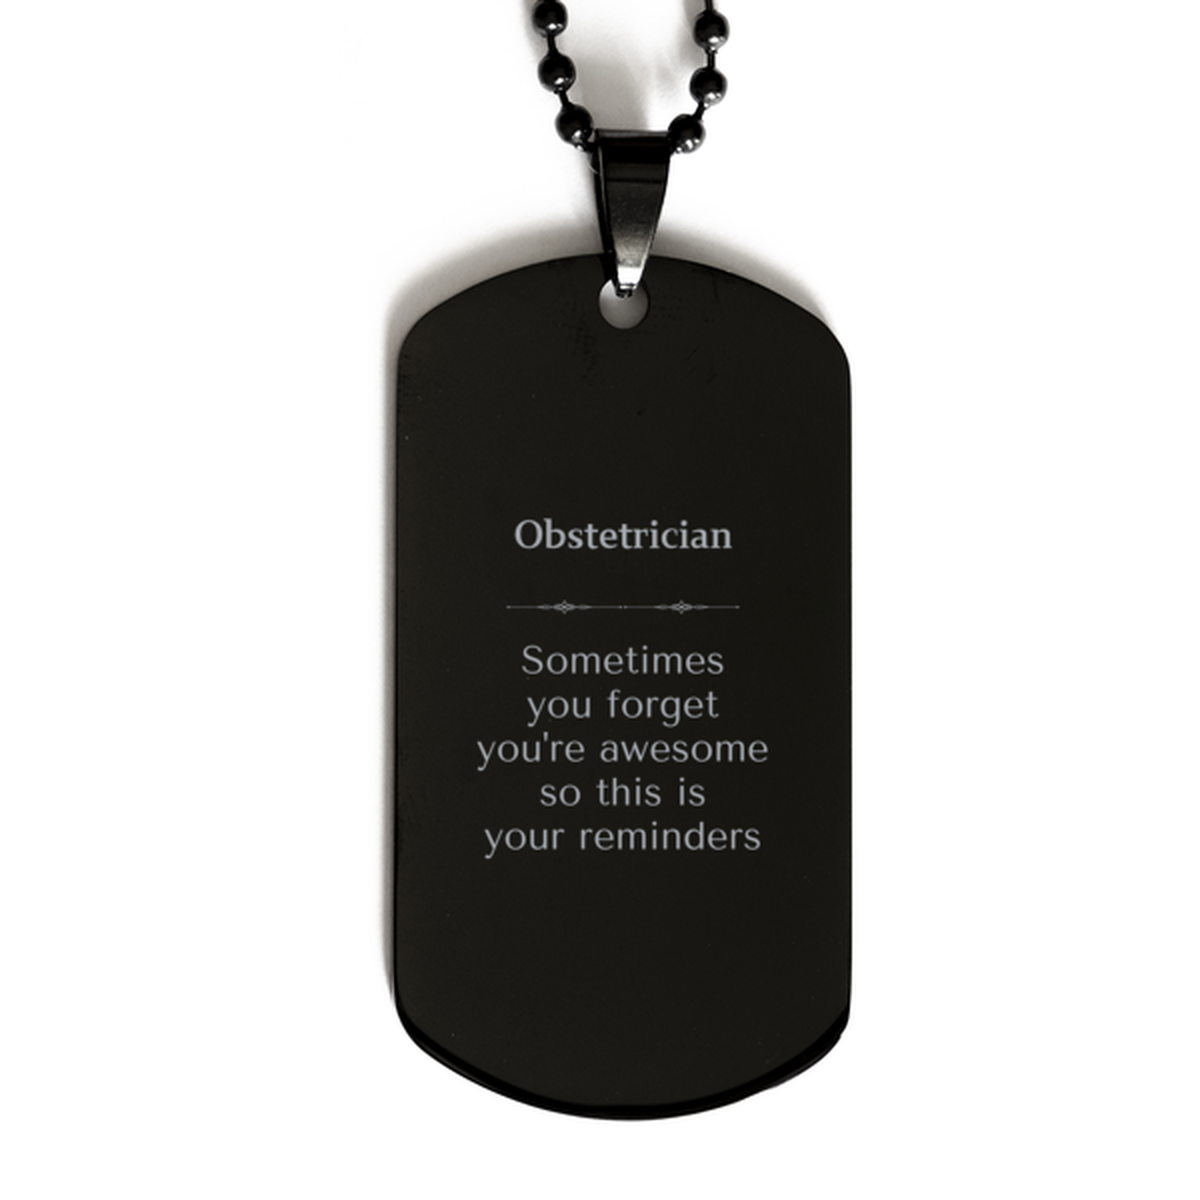 Sentimental Obstetrician Black Dog Tag, Obstetrician Sometimes you forget you're awesome so this is your reminders, Graduation Christmas Birthday Gifts for Obstetrician, Men, Women, Coworkers